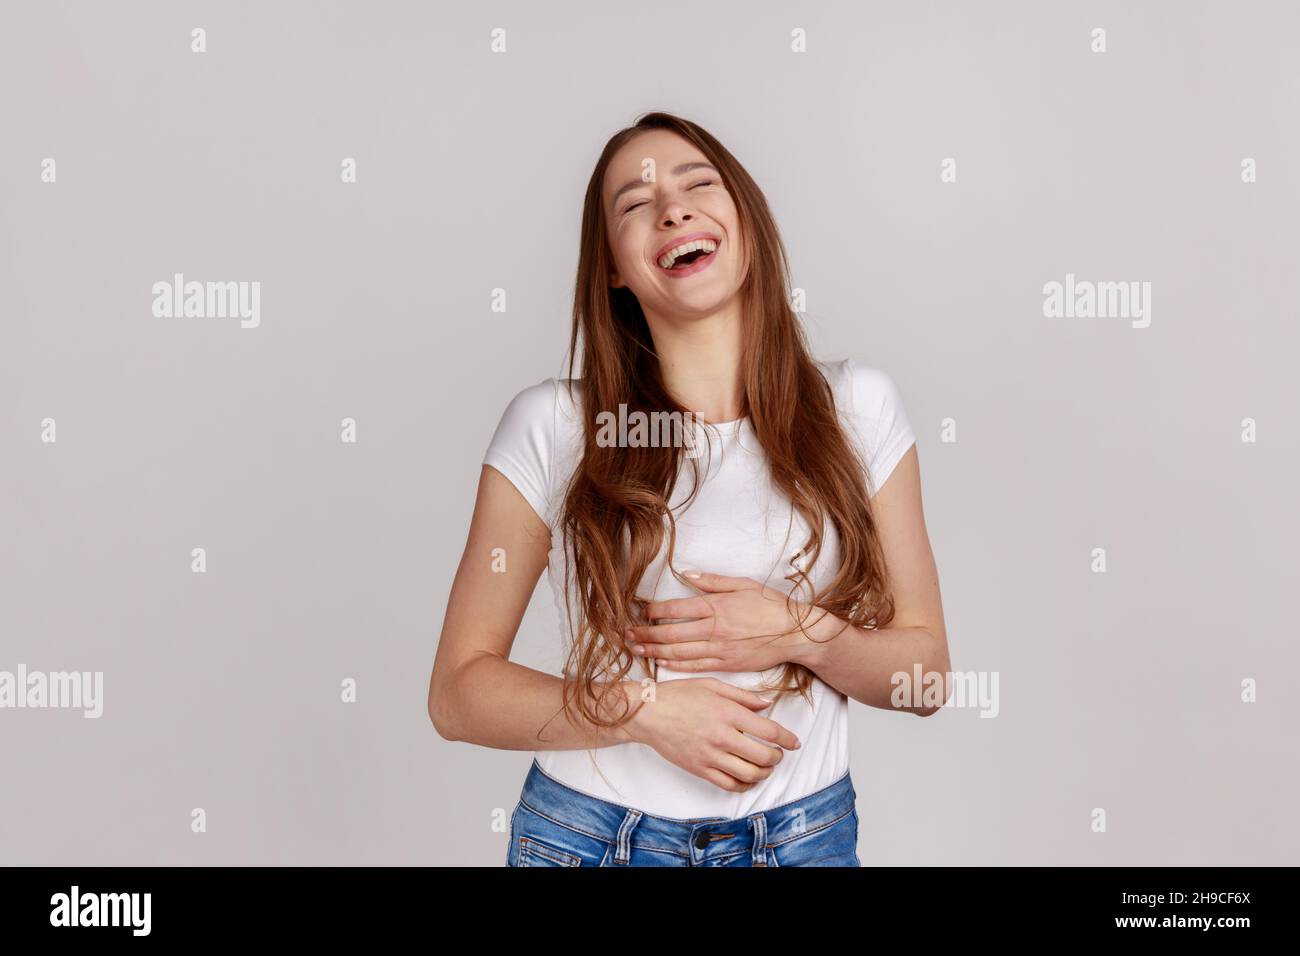 Extremely happy woman holding her stomach and laughing out loud, chuckling giggling at amusing anecdote, sincere emotion, wearing white T-shirt. Indoor studio shot isolated on gray background. Stock Photo